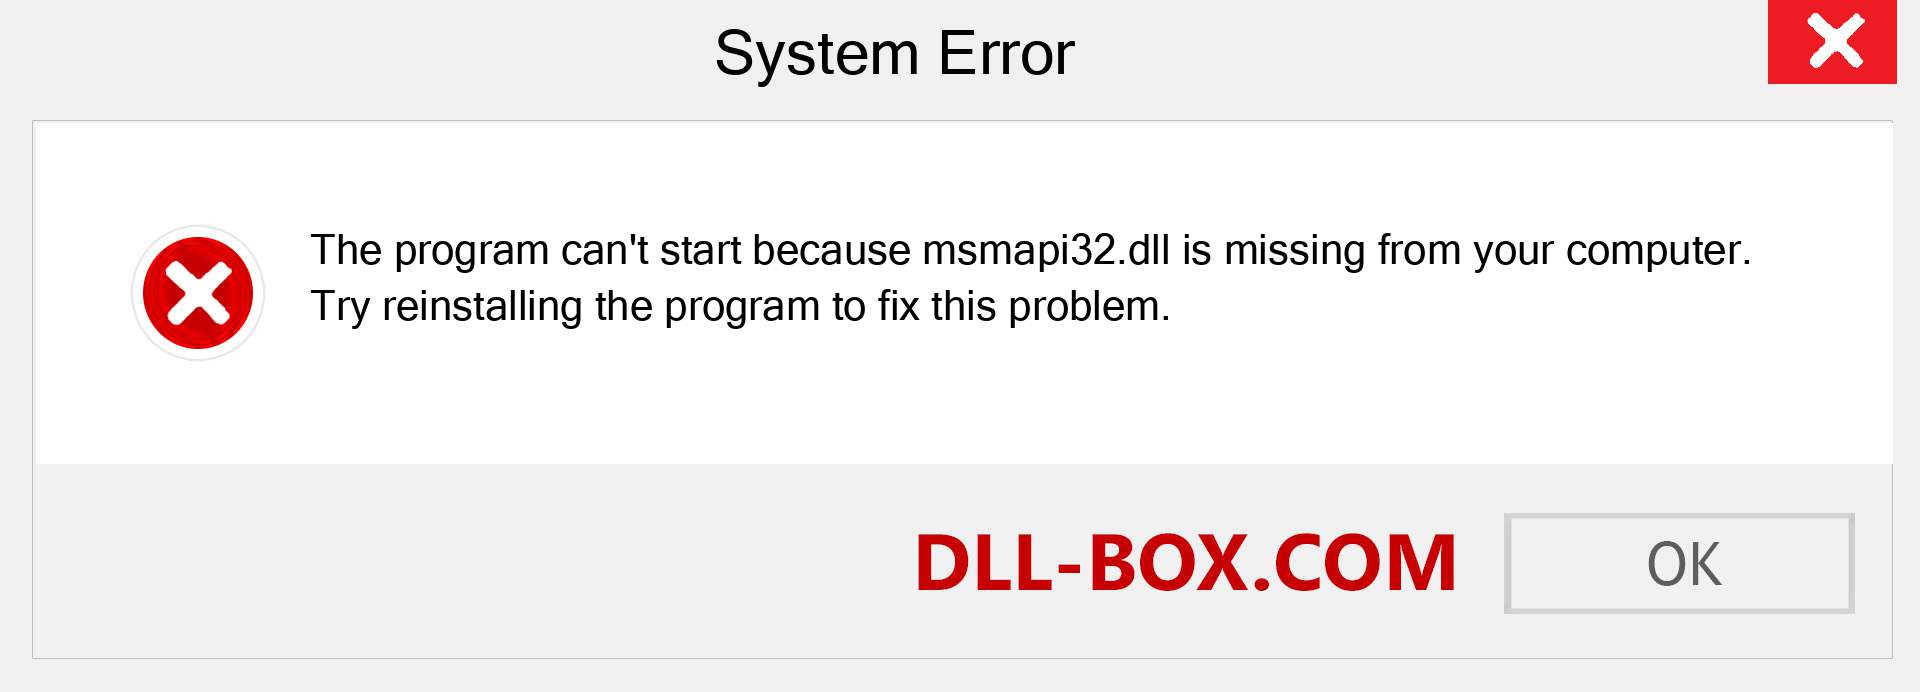  msmapi32.dll file is missing?. Download for Windows 7, 8, 10 - Fix  msmapi32 dll Missing Error on Windows, photos, images